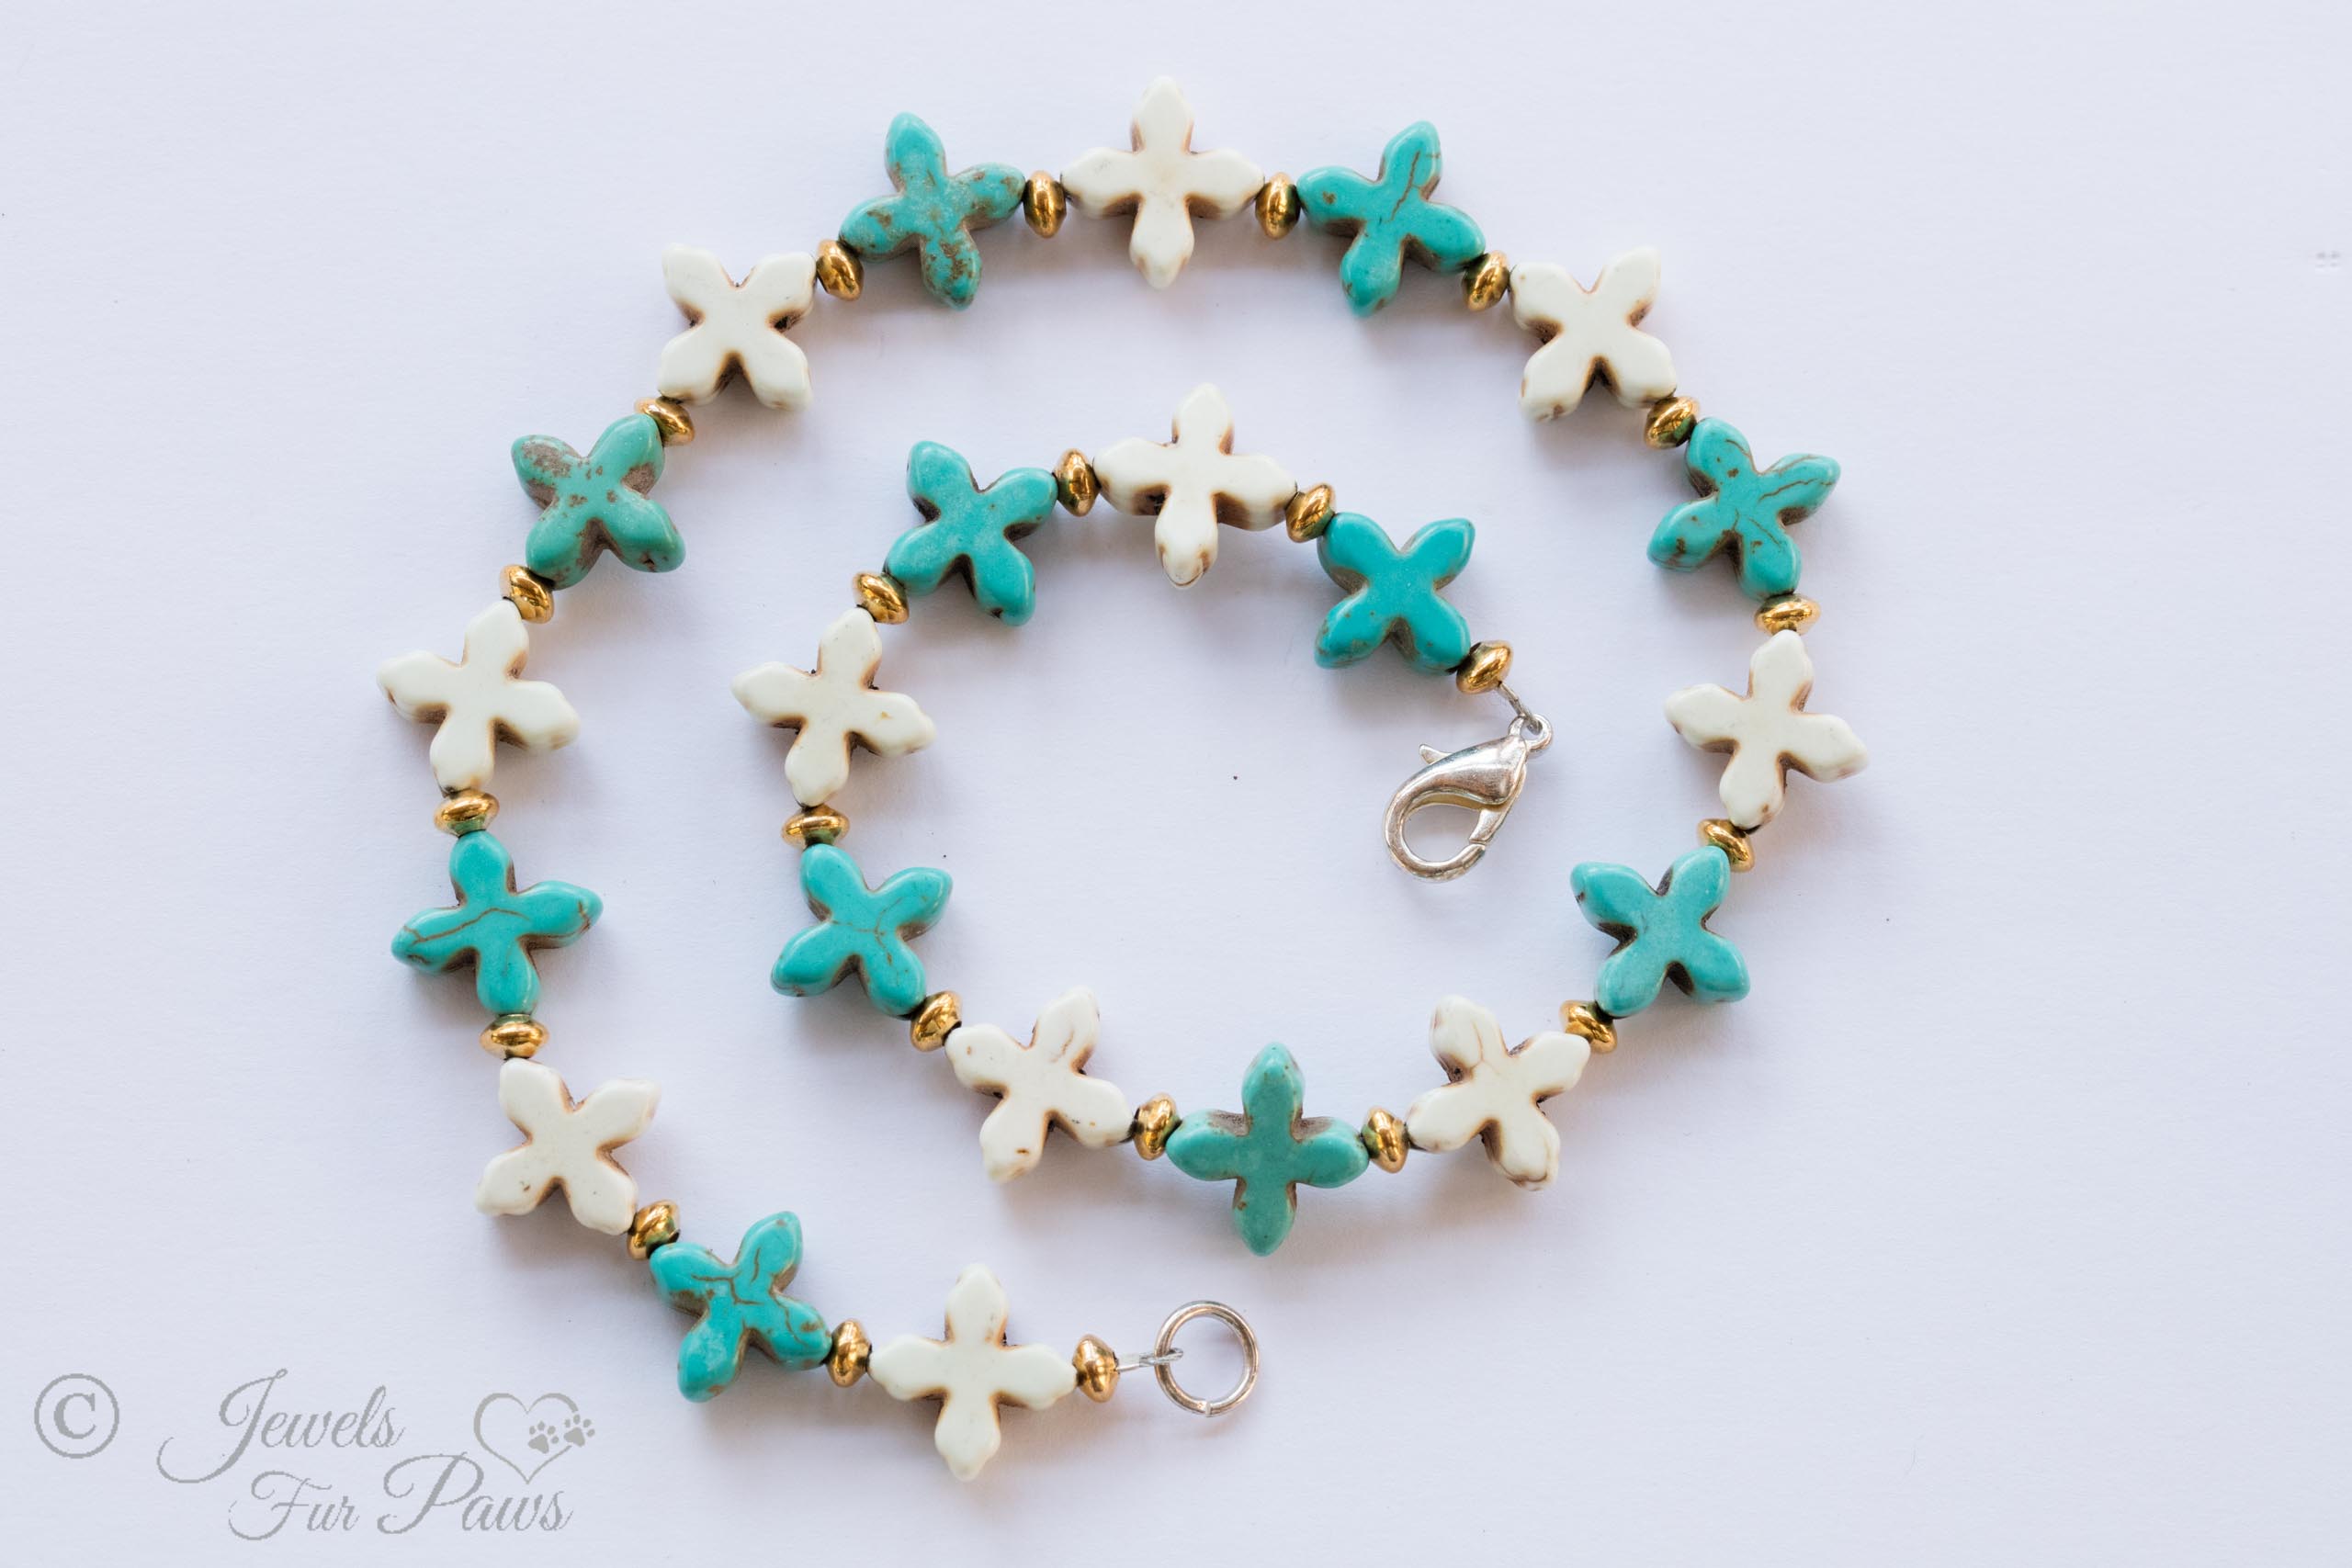 dog cat pet necklaces jewelry eleven pale blue turquoise crosses with eleven white howlite crosses and gold spacers on a white background